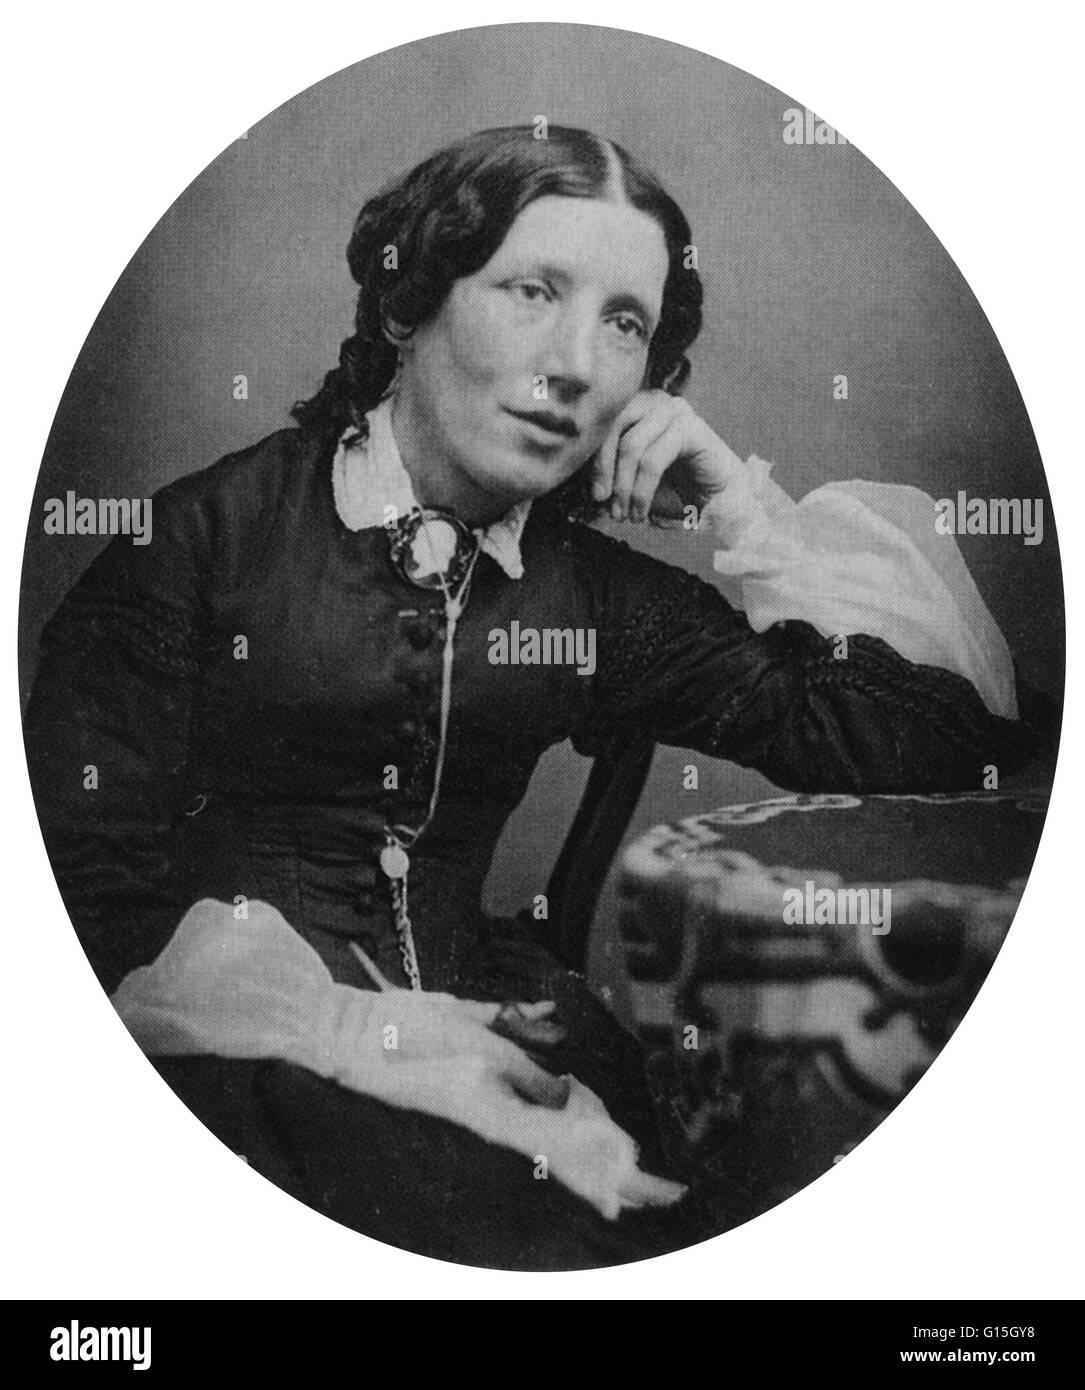 Harriet Beecher Stowe (June 14, 1811 - July 1, 1896) was an American abolitionist and author. Her novel Uncle Tom's Cabin (1852) depicted life for African-Americans under slavery. It was read and seen by millions as a novel and play, and became influentia Stock Photo